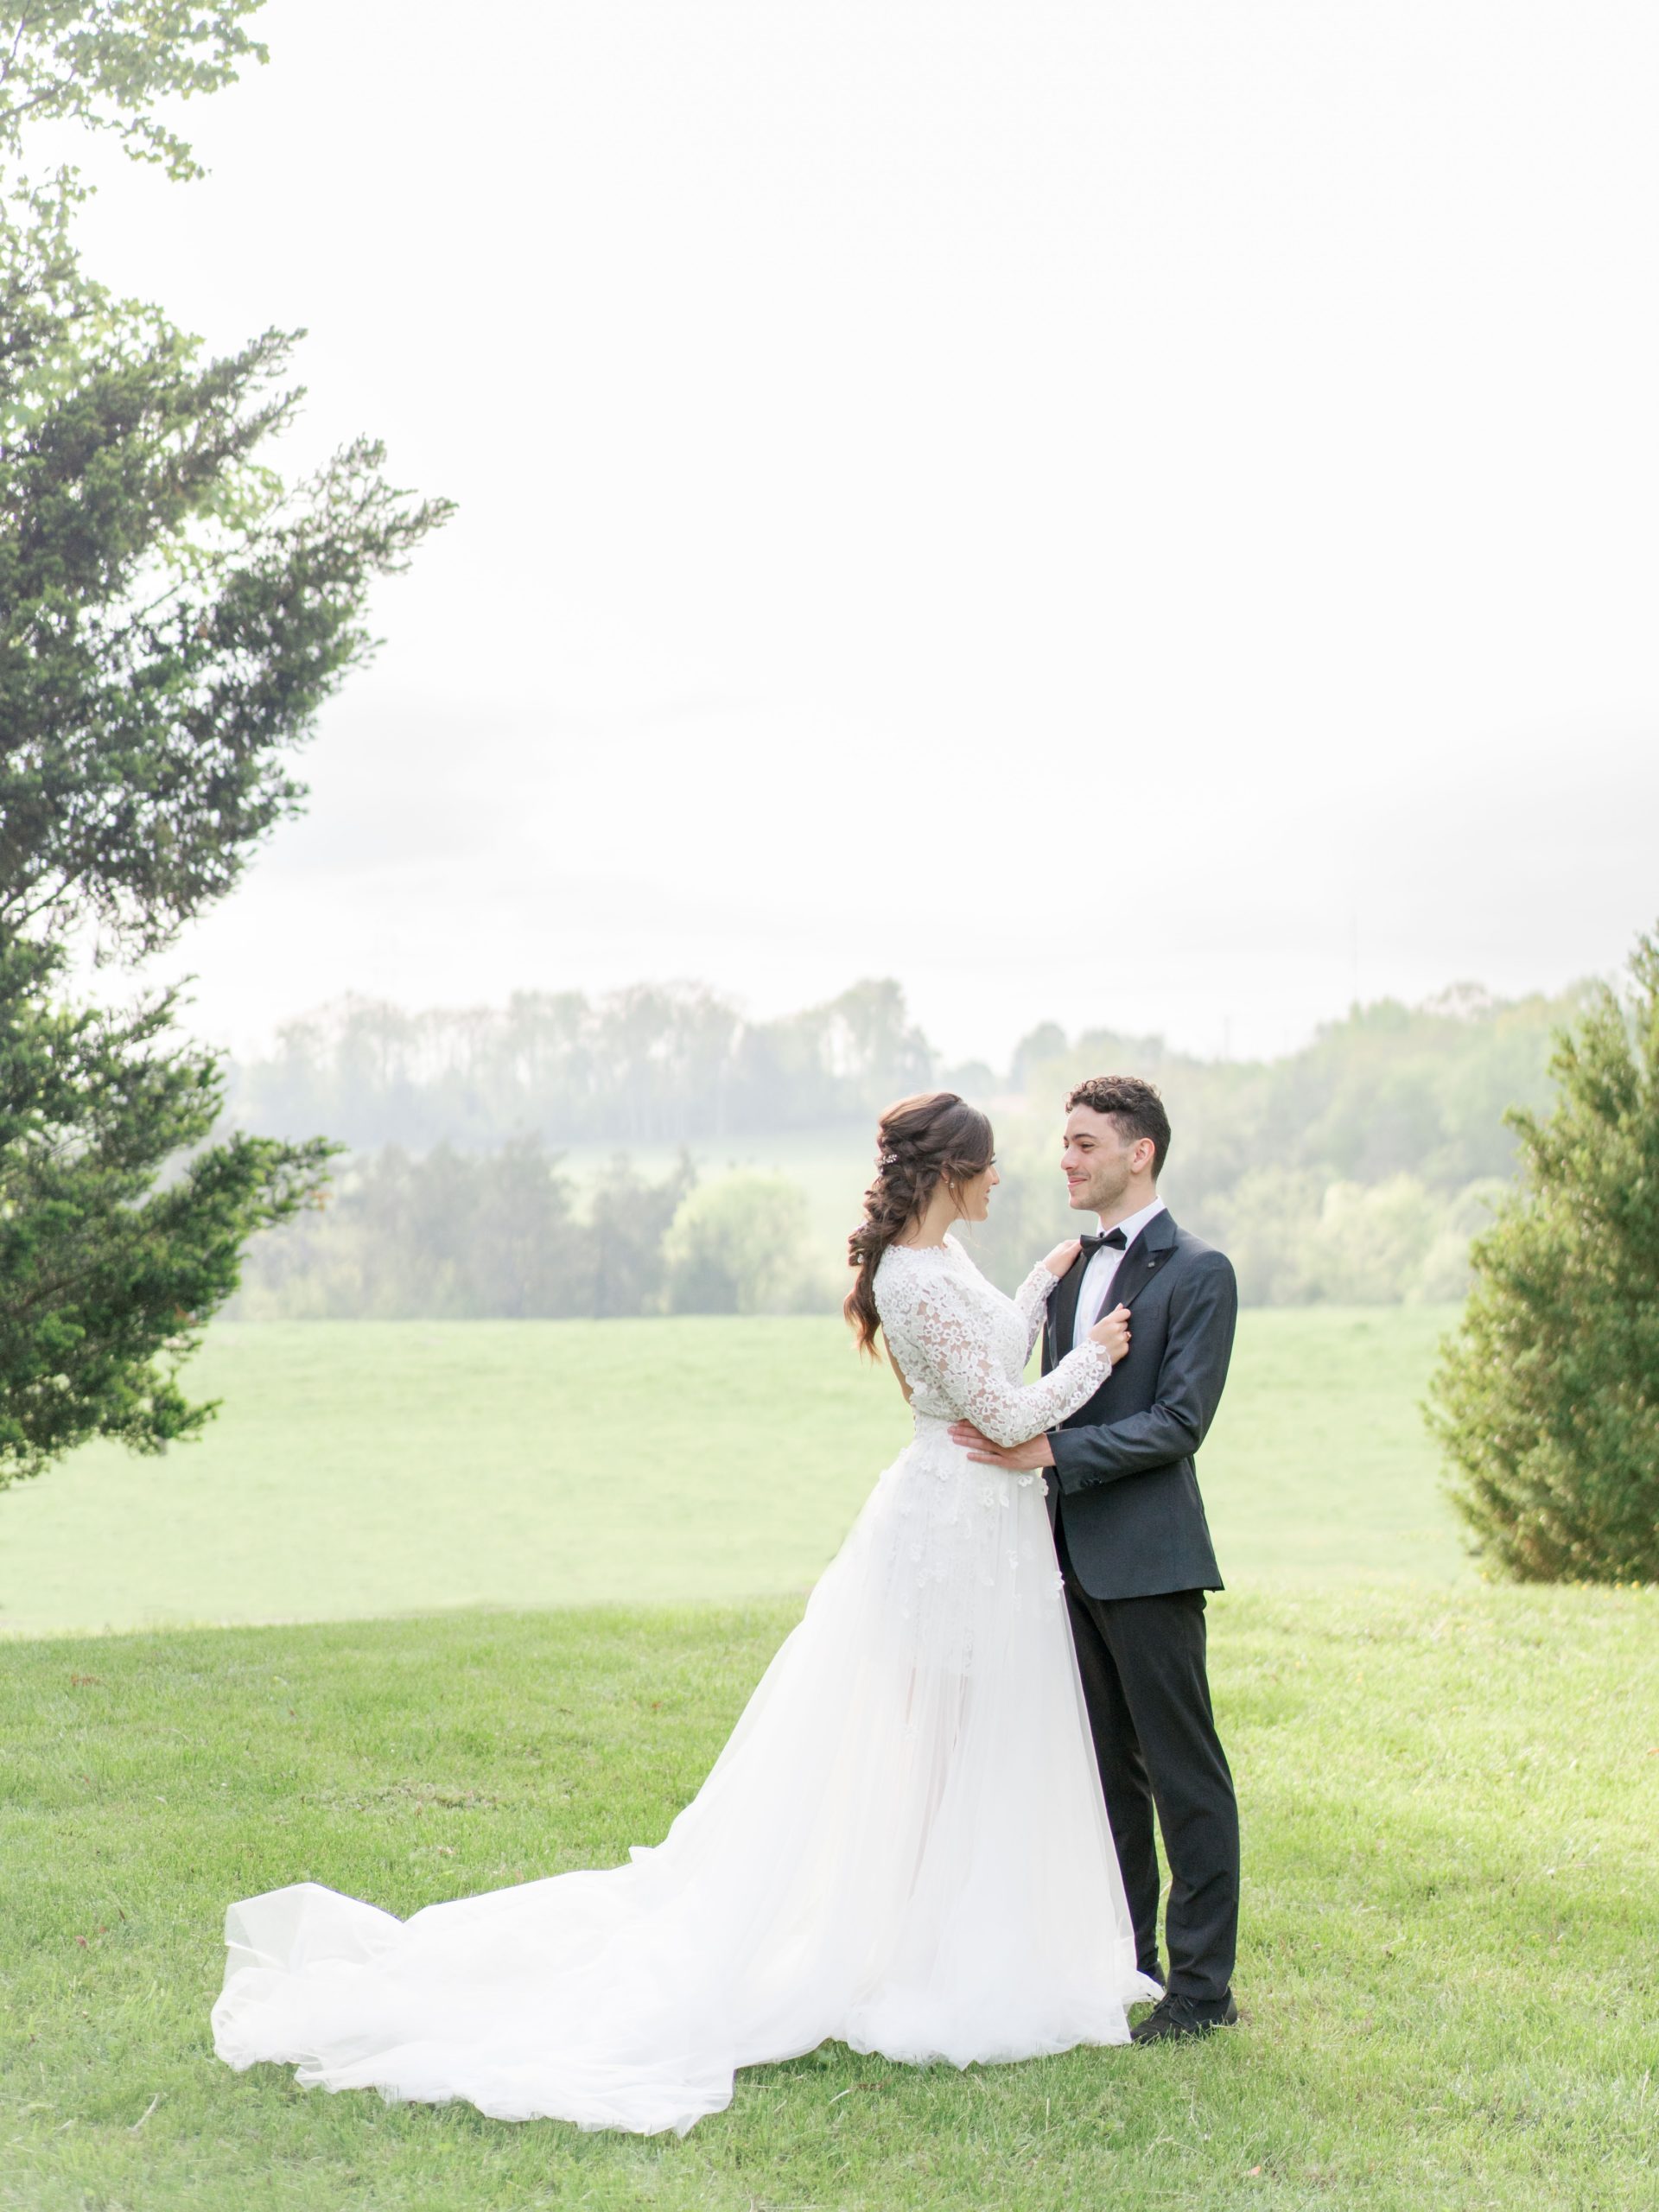 An elegant equestrian wedding at Historic Salubria in Virginia captured by Alicia Lacey.